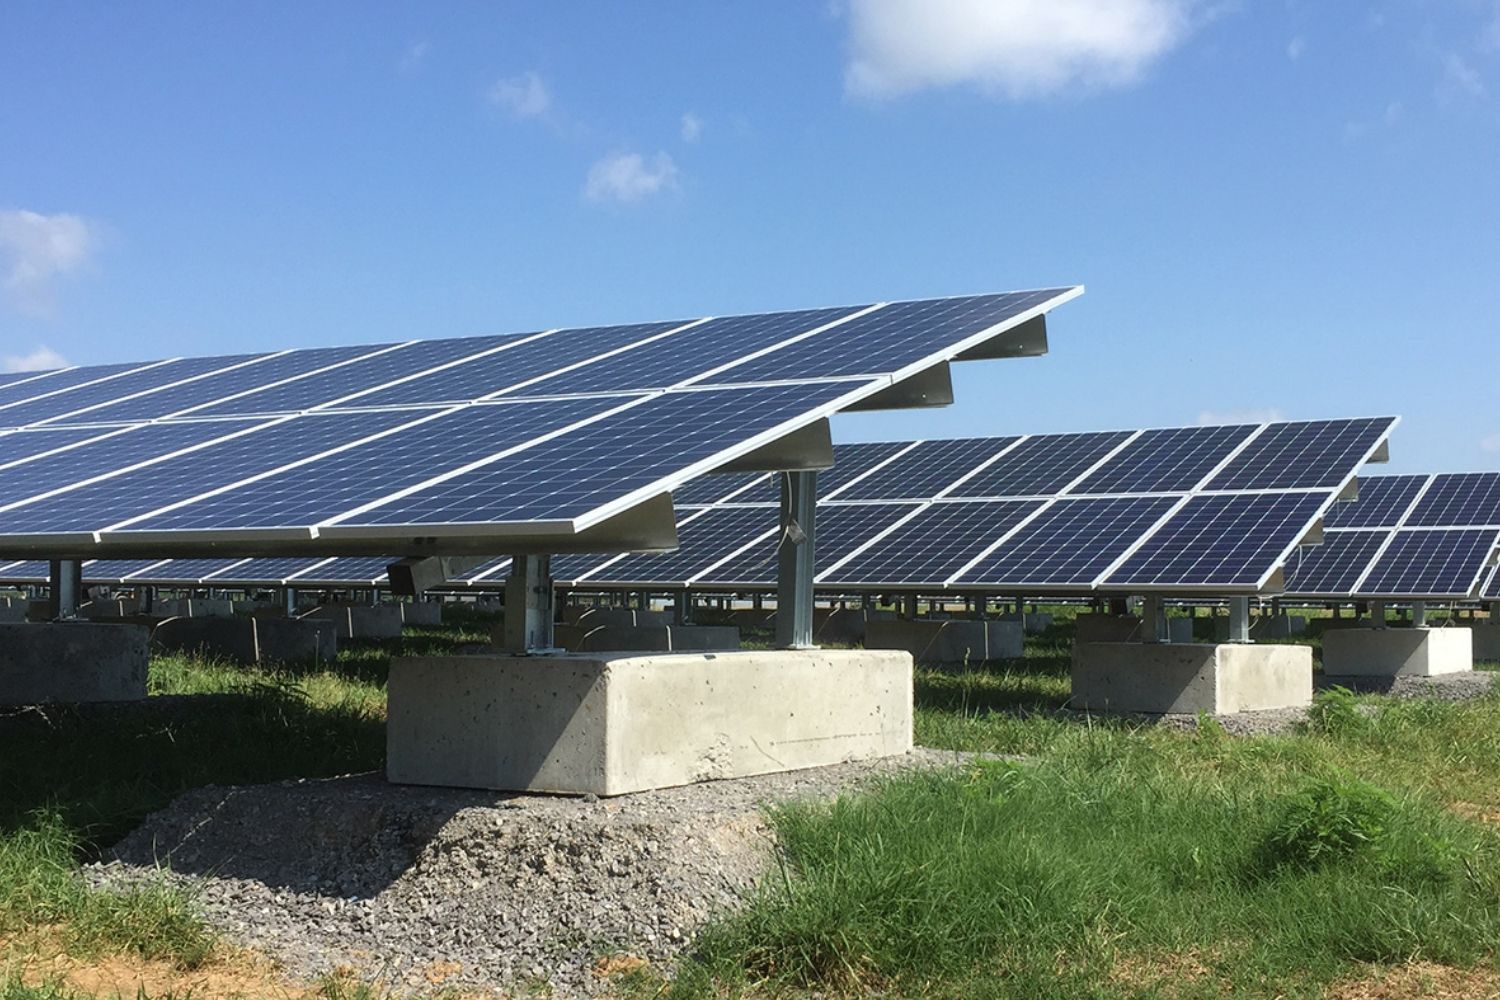 Ground Mounted Solar Panels mounted by concrete blocks